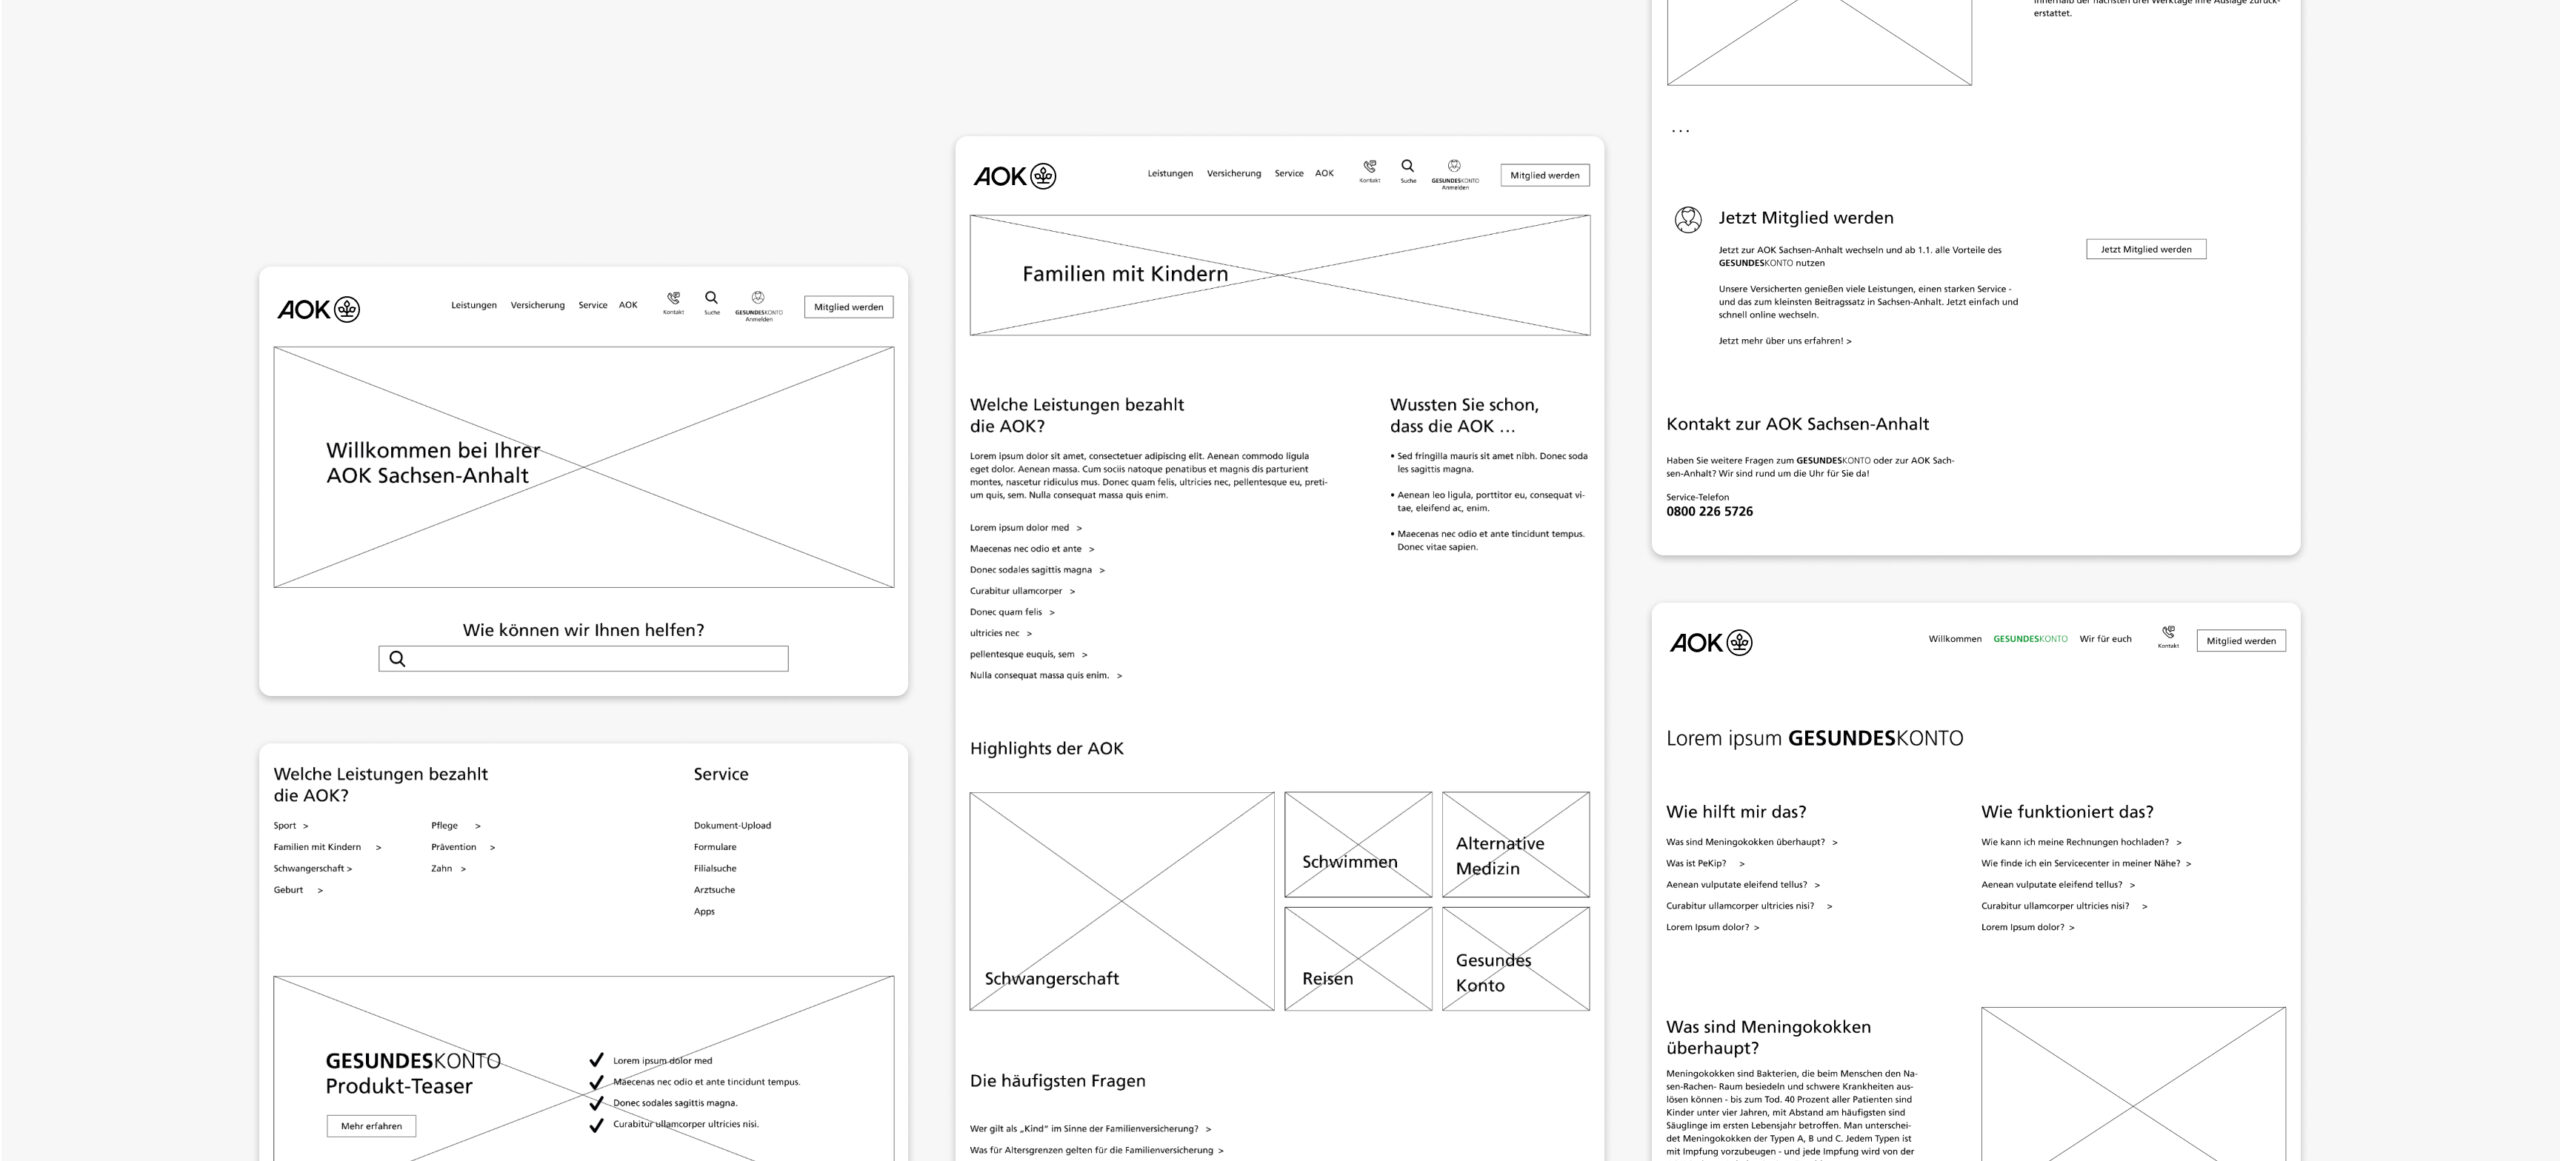 Low-res wireframes showing the website structure